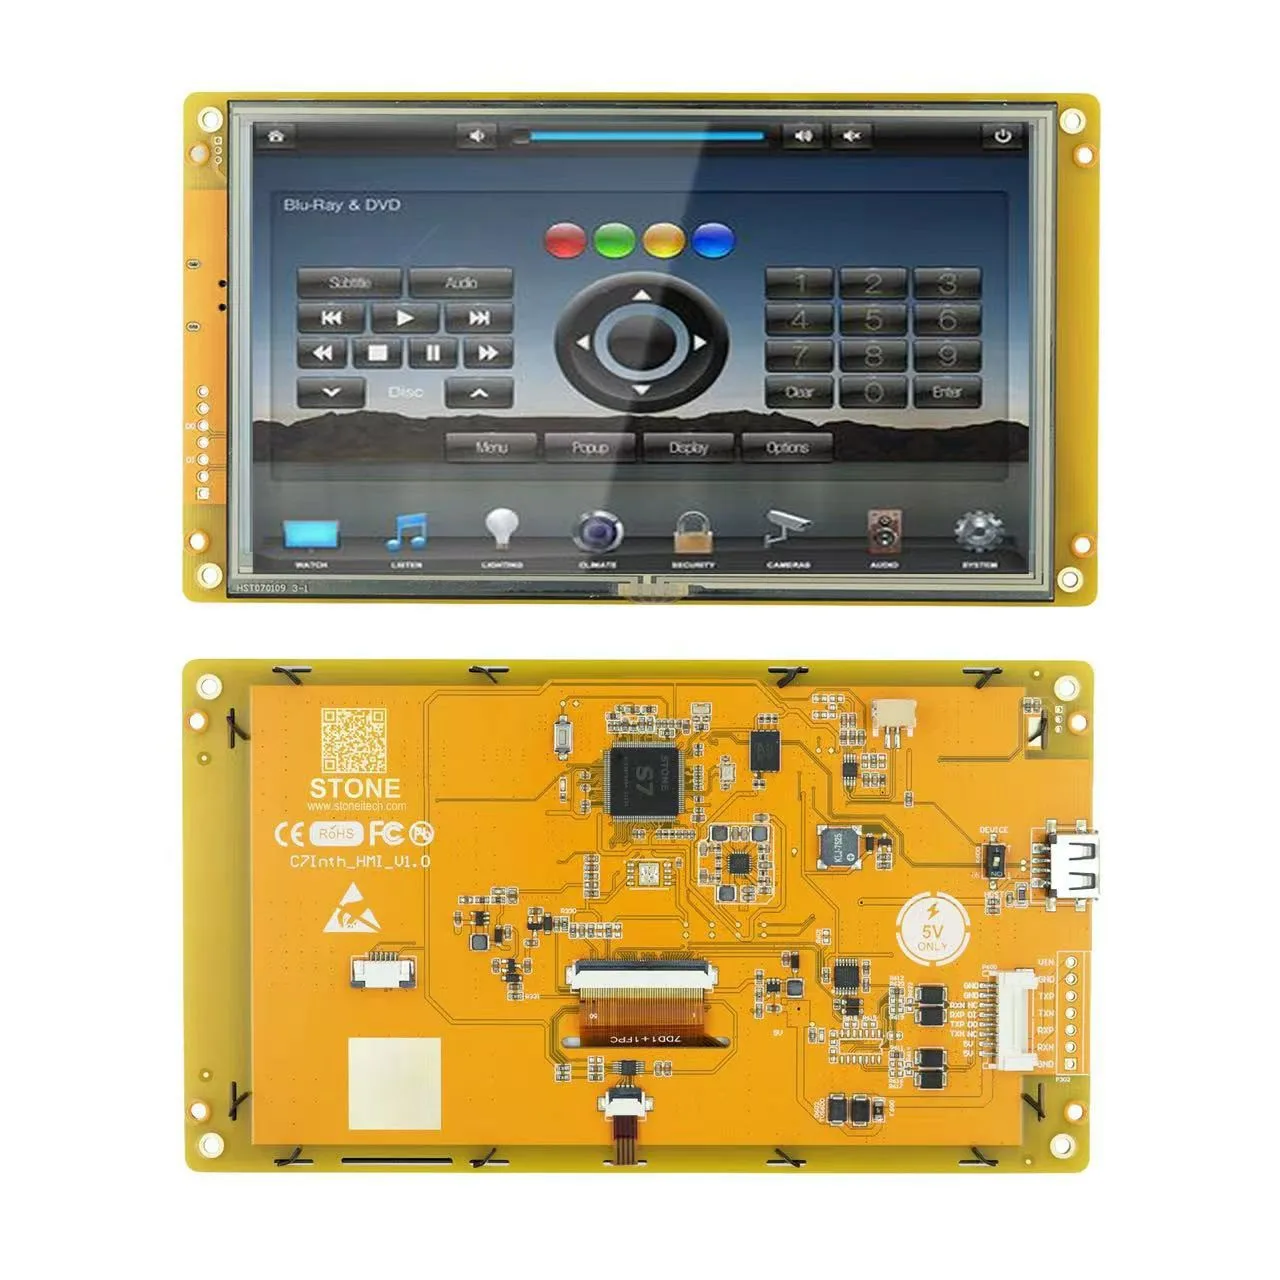 7 Inch LCD-TFT HMI Display Module Intelligent Series RS232/TTL Resistive Touch Panel for Industrial Equipment Control